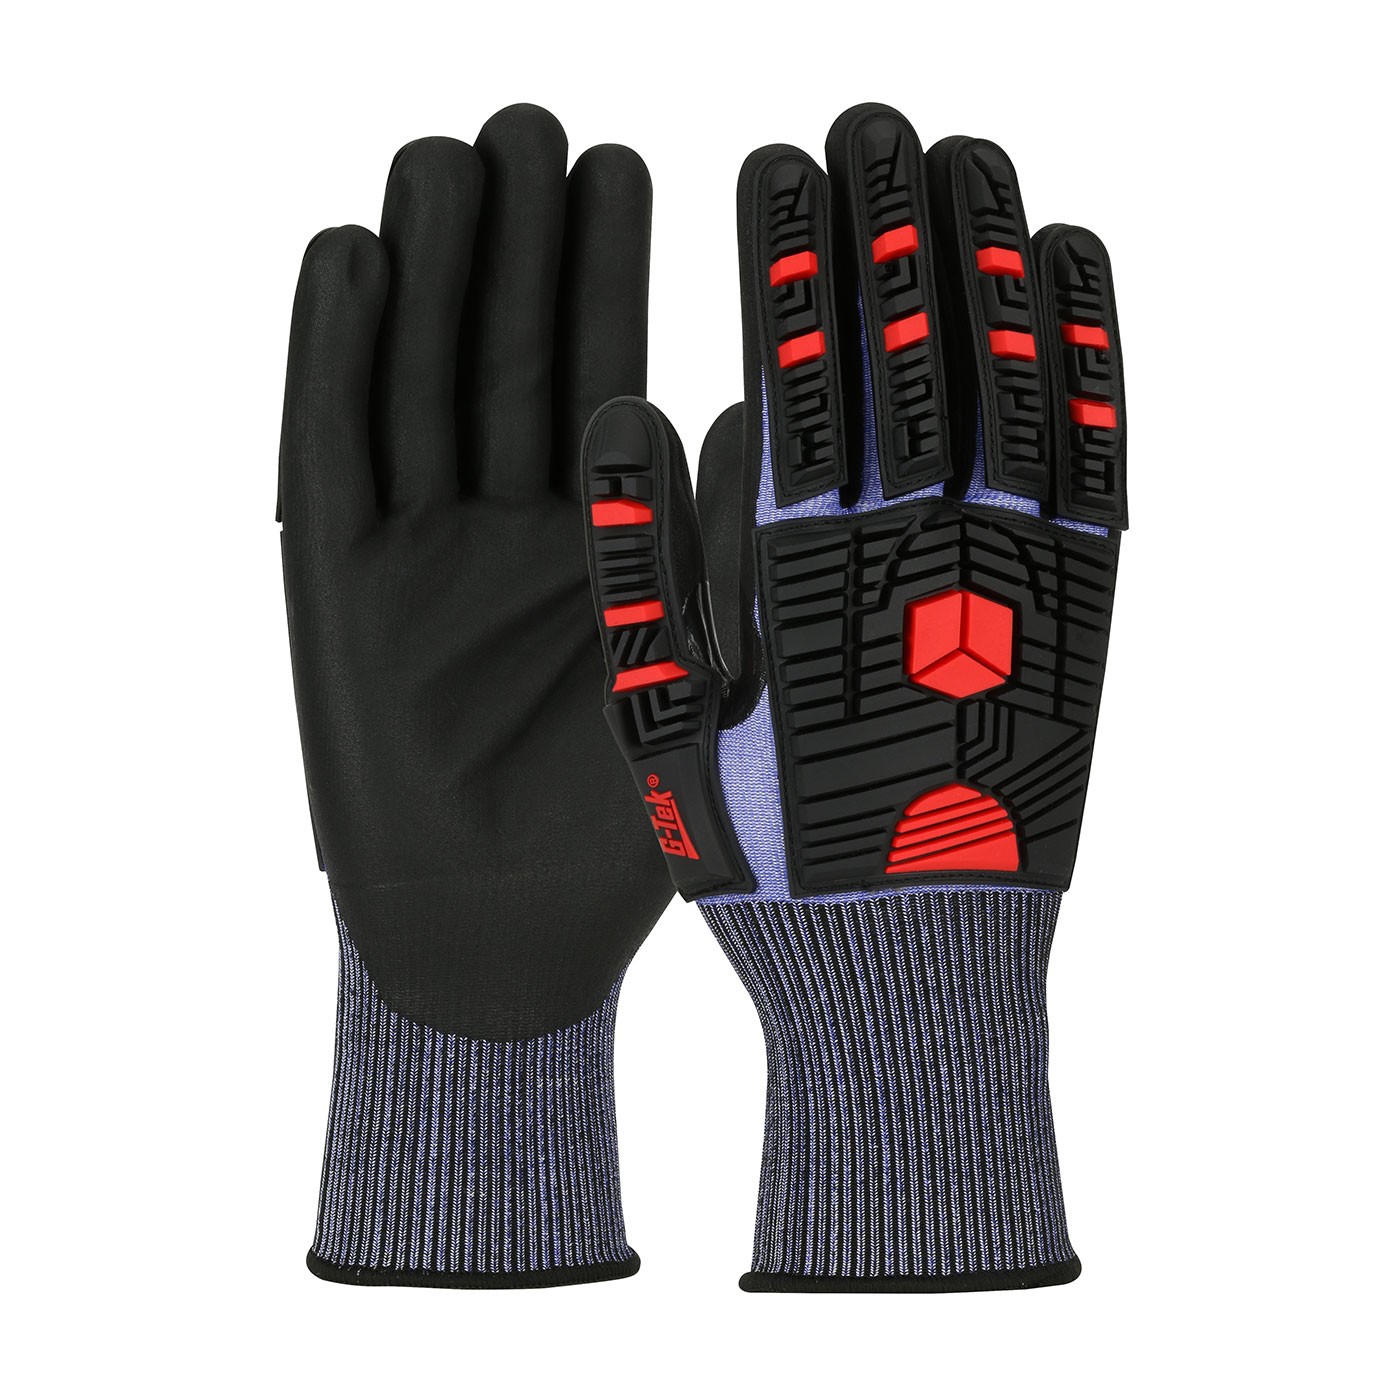 G-Tek® PolyKor® X7™ Seamless Knit PolyKor® X7™ Blended Glove with Impact Protection and NeoFoam® Coated Palm & Fingers  (#16-MP585)